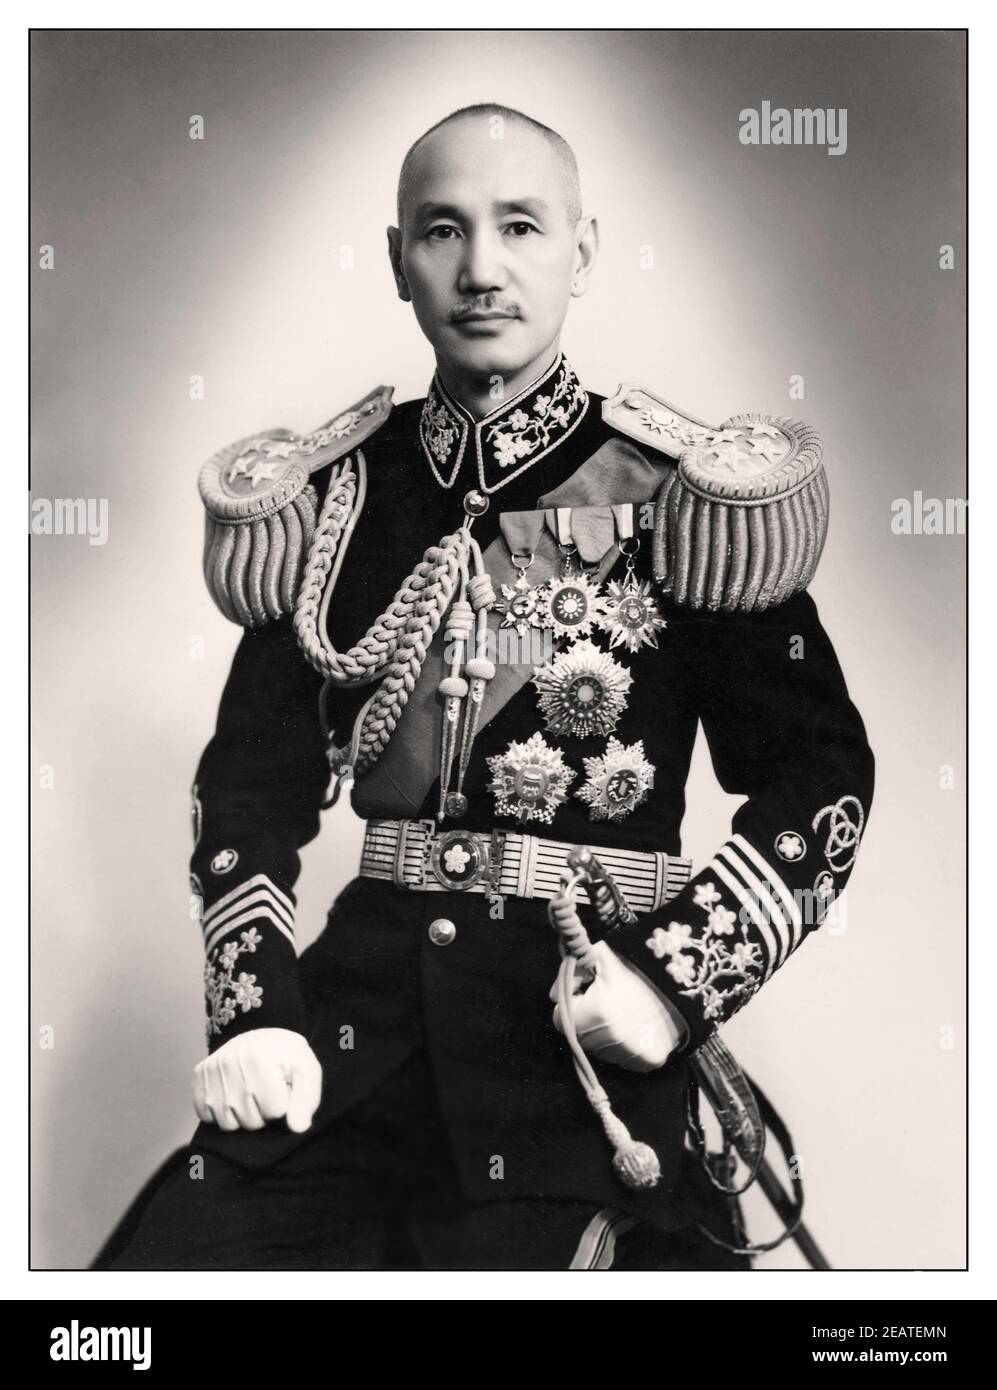 1940's WW2 Chiang Kai-shek Chairman of the National Government of the Republic of China 1943 formal studio portrait of  Chiang Kai-shek in official uniform, leader of Taiwan Chiang Kai-shek (31 October 1887 – 5 April 1975) also known as Chiang Chung-cheng and romanized via Mandarin as Chiang Chieh-shih and Jiang Jieshi, was a Chinese Nationalist politician, revolutionary and military leader who served as the leader of the Republic of China between 1928 and 1975, first in mainland China until 1949 and then in Taiwan until his death. Stock Photo